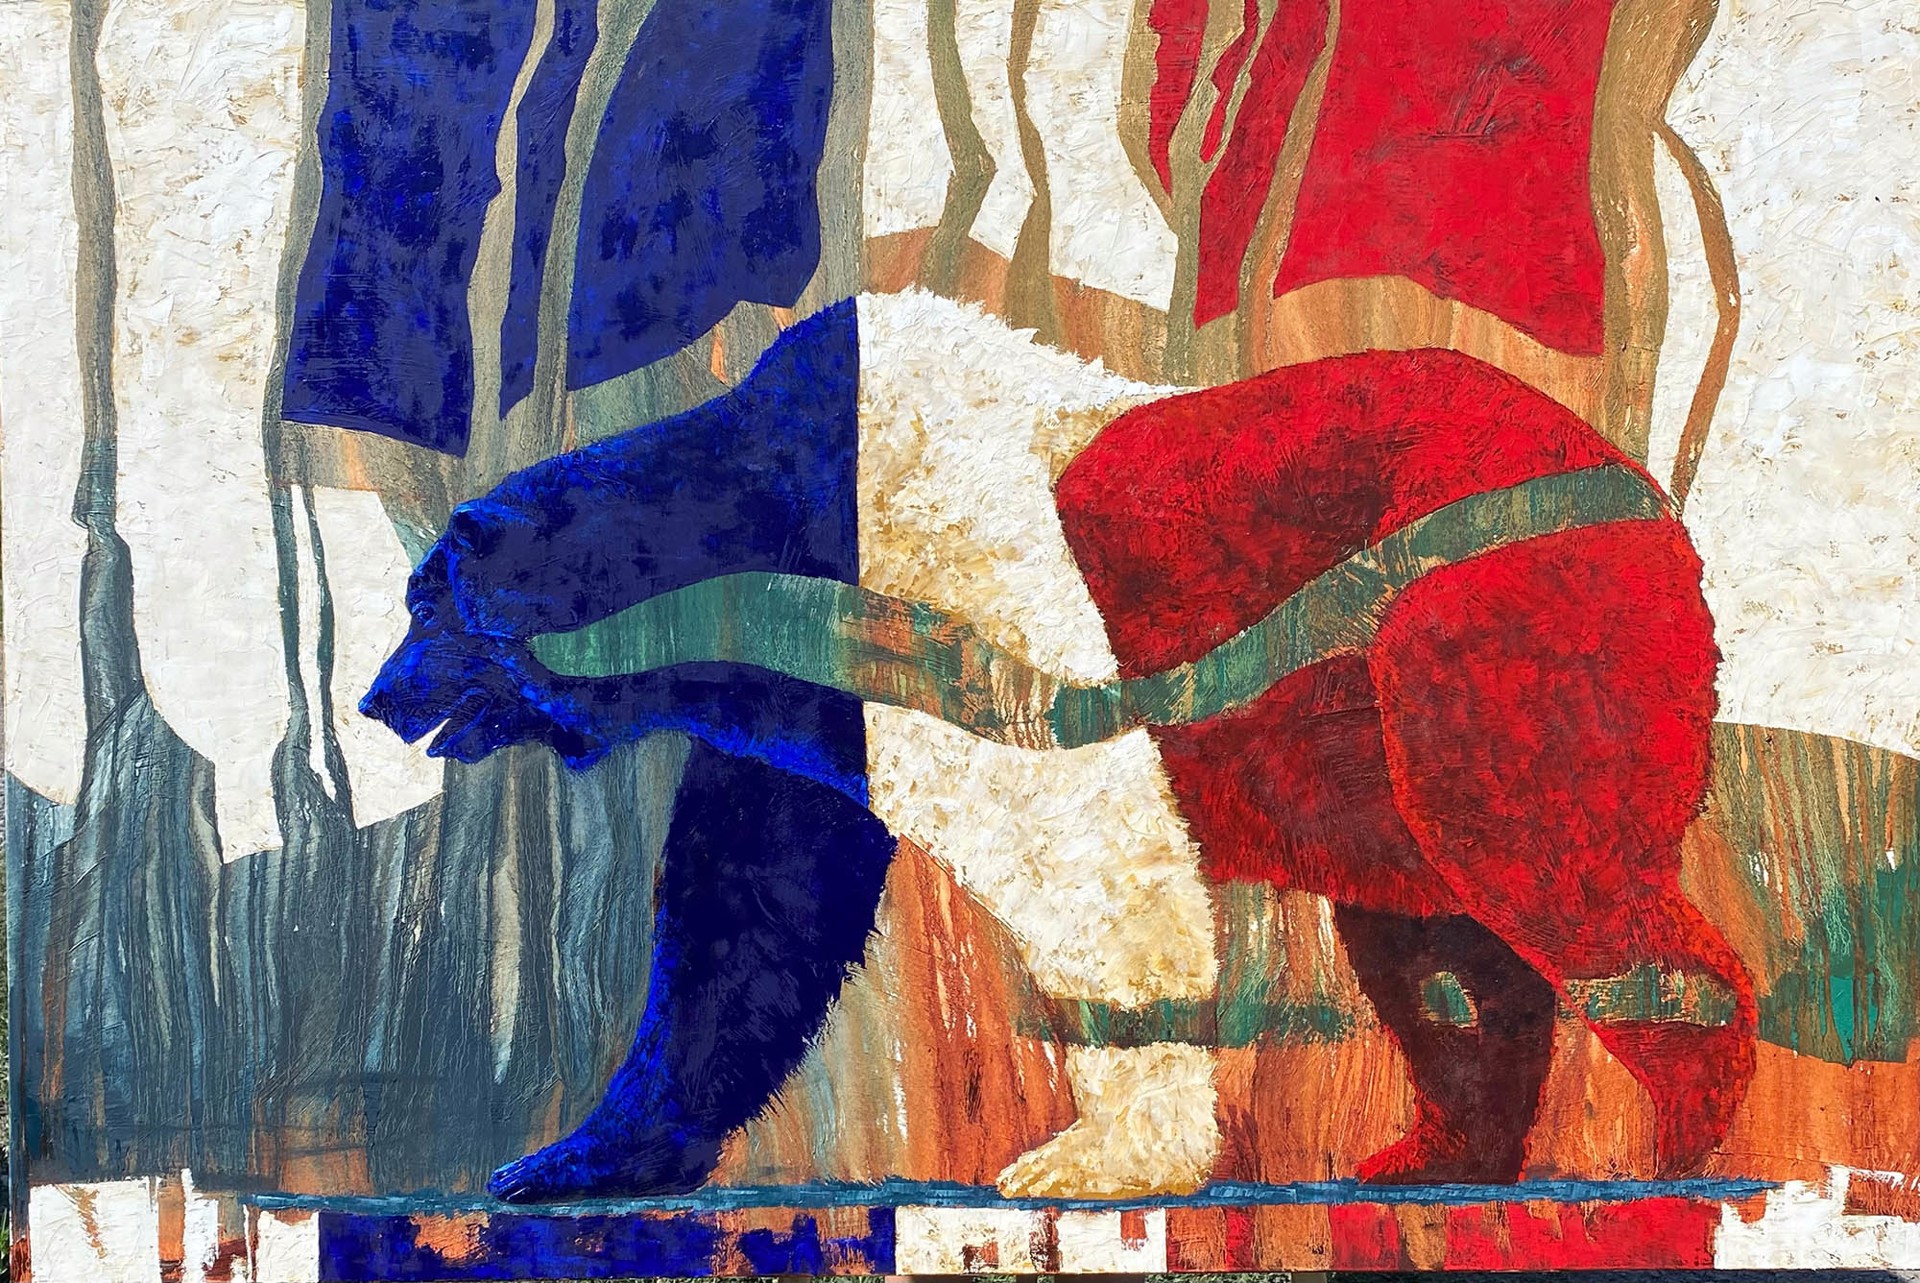 Original Oil Painting Featuring A Walking Bear In Color Blocked Red, White And Blue Over Abstract Background